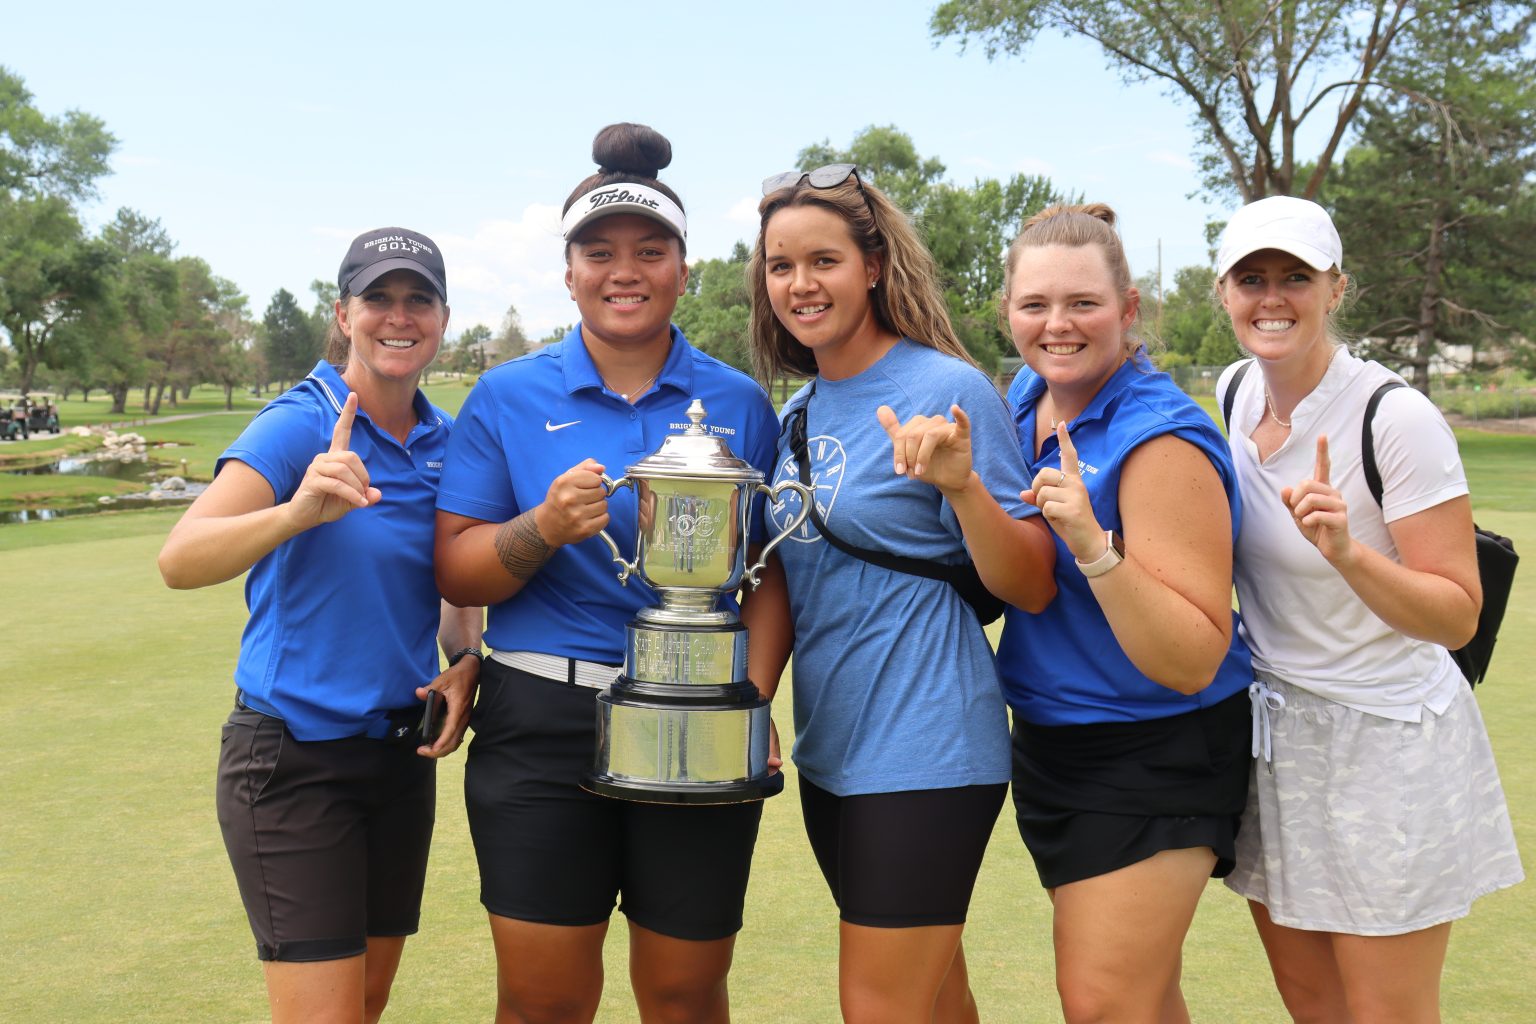 115th Utah Women’s State Amateur Championship Match : A Meaningful Victory